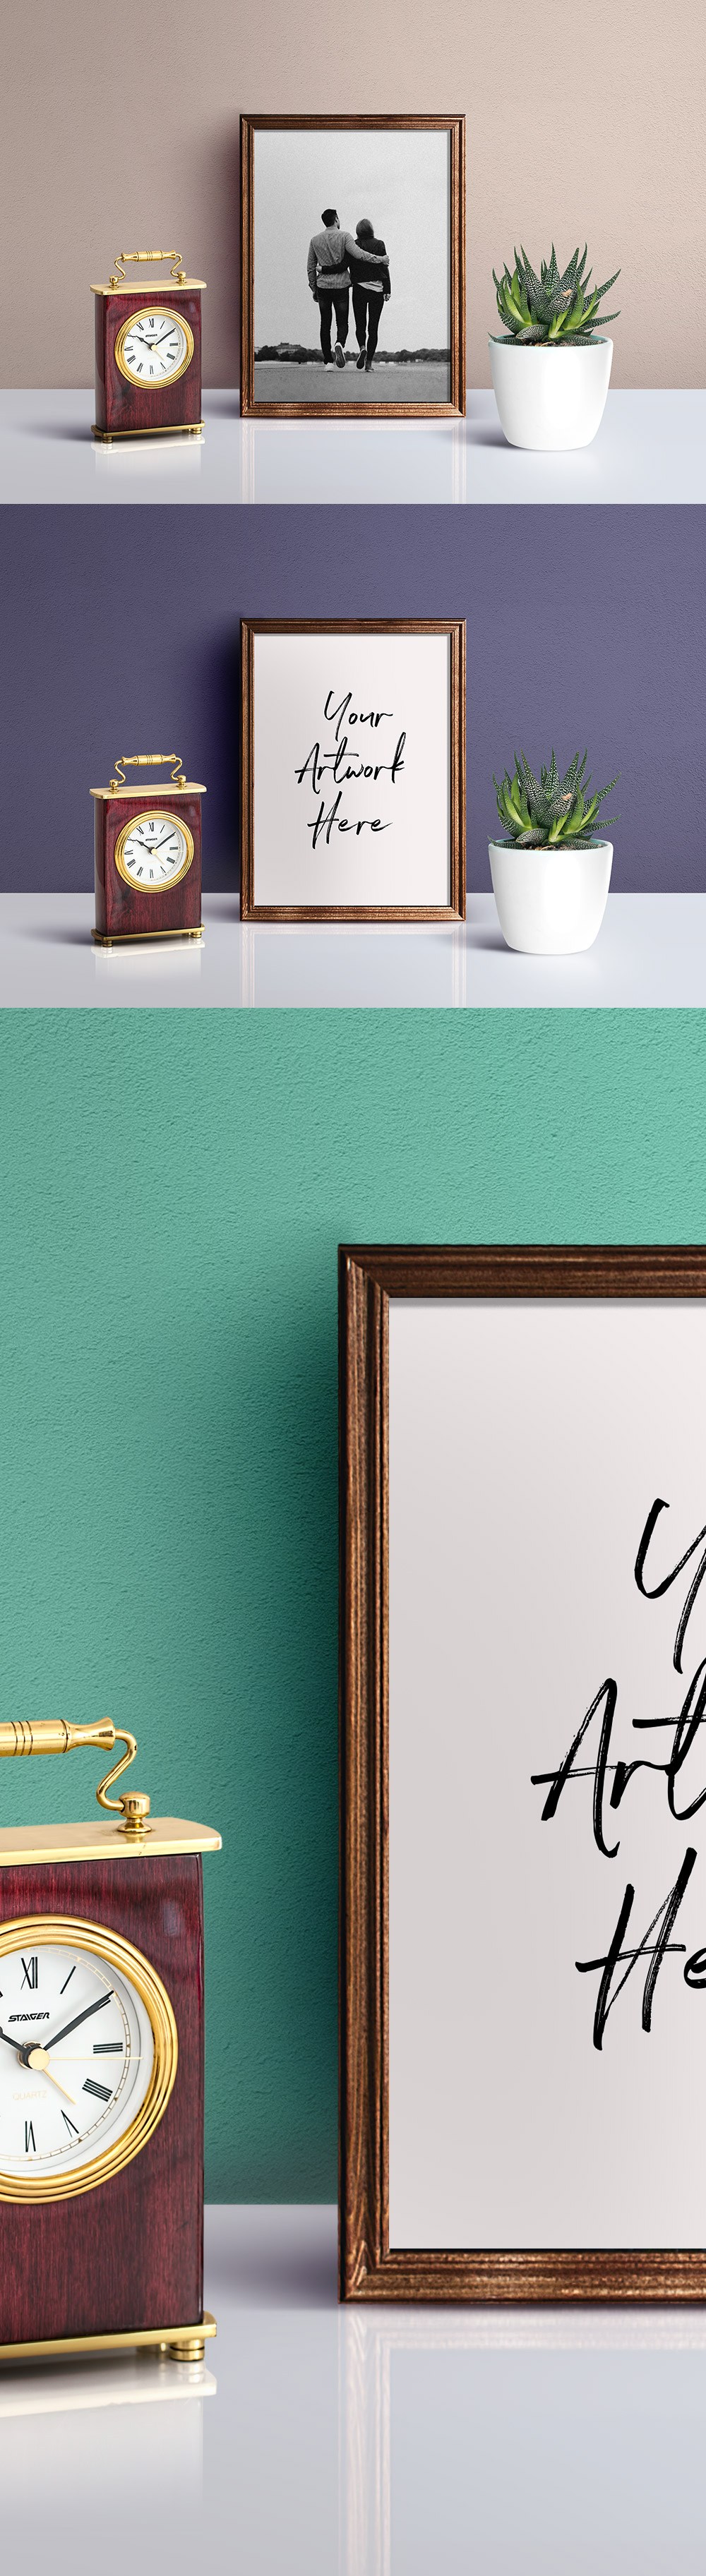 Download Picture Frame Mockup PSD | Free PSD Templates